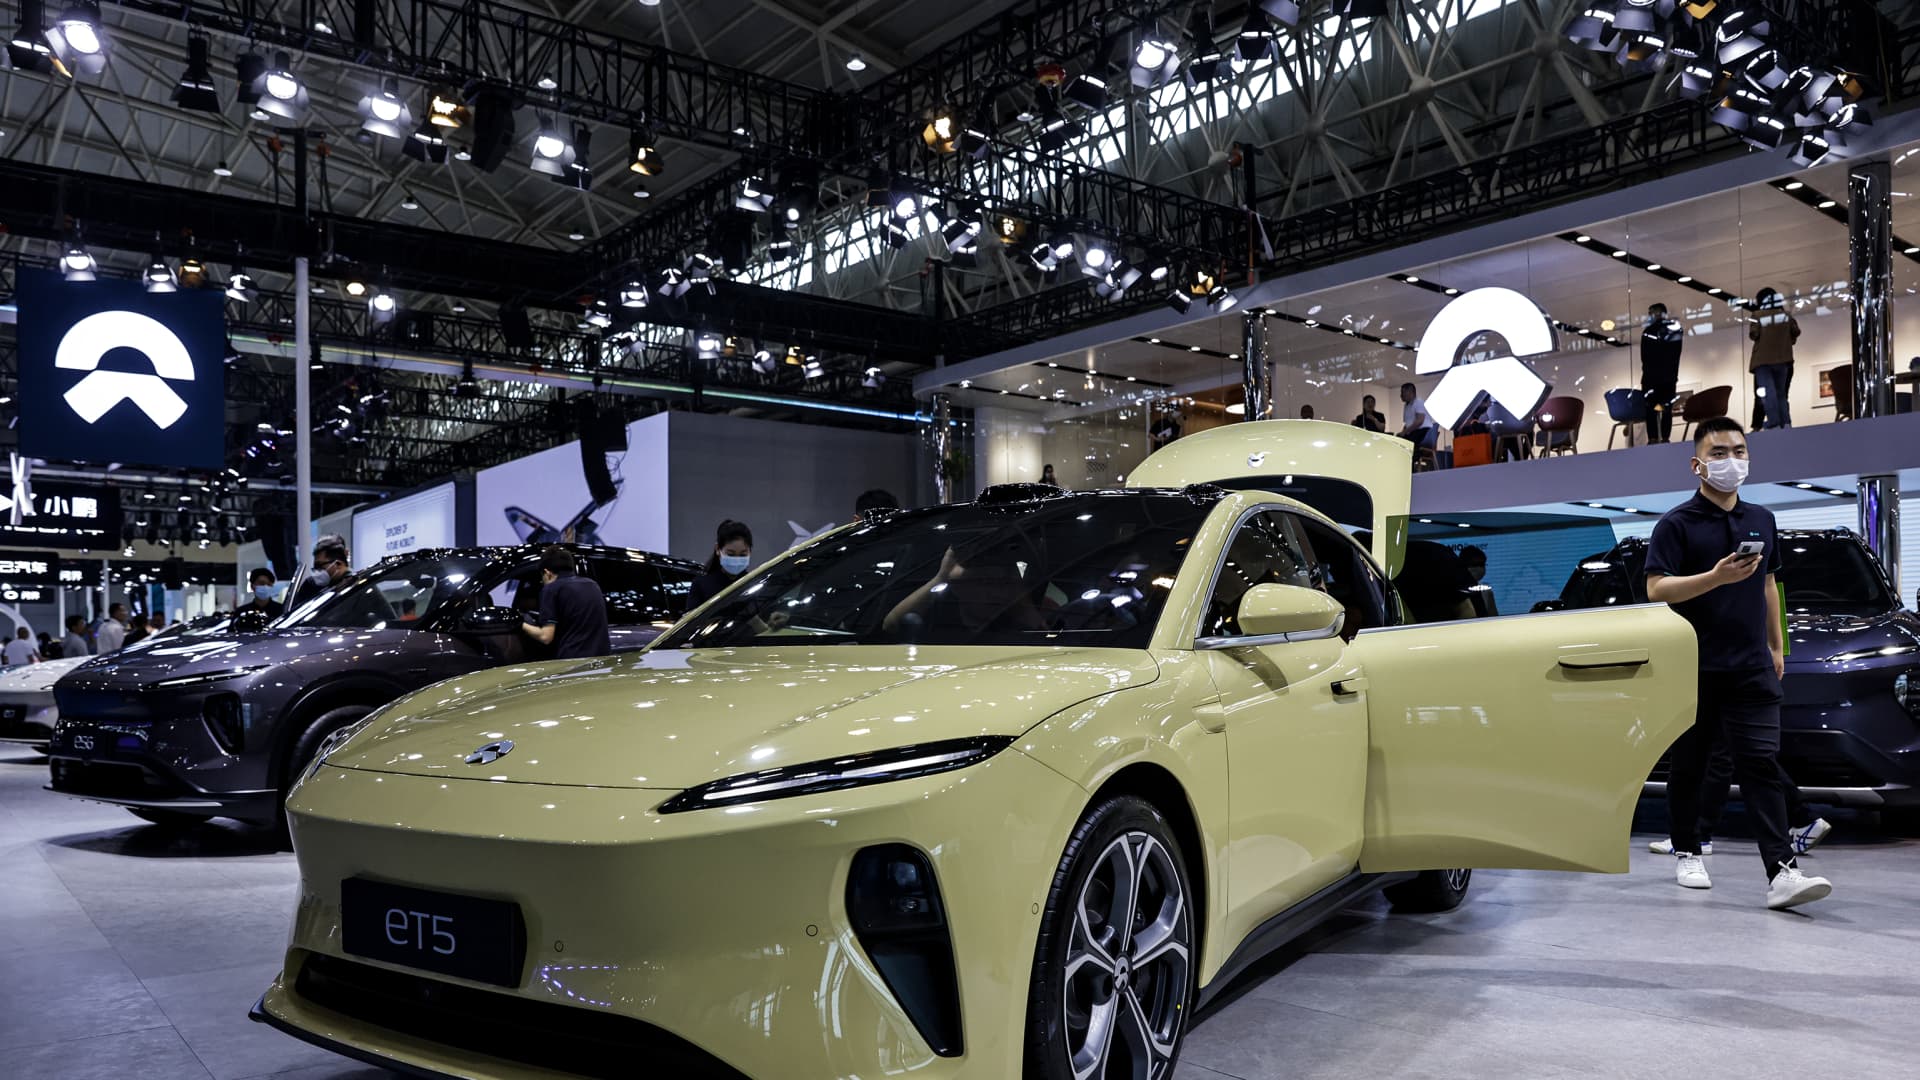 Chinese EV maker Nio raises more than $700 million in capital injection from Abu Dhabi